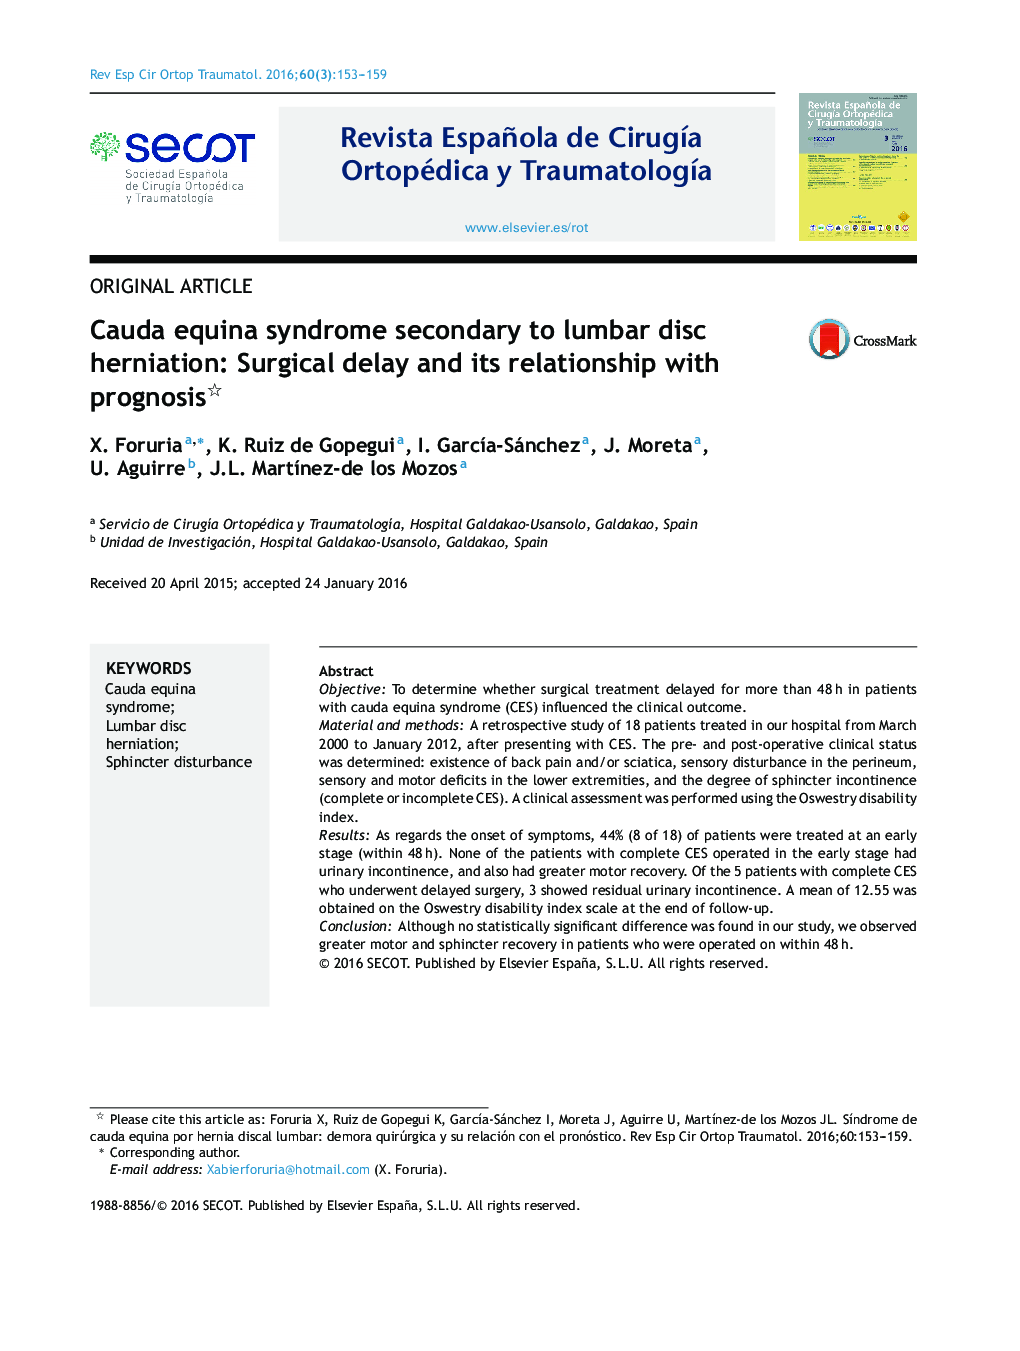 Cauda equina syndrome secondary to lumbar disc herniation: Surgical delay and its relationship with prognosis 